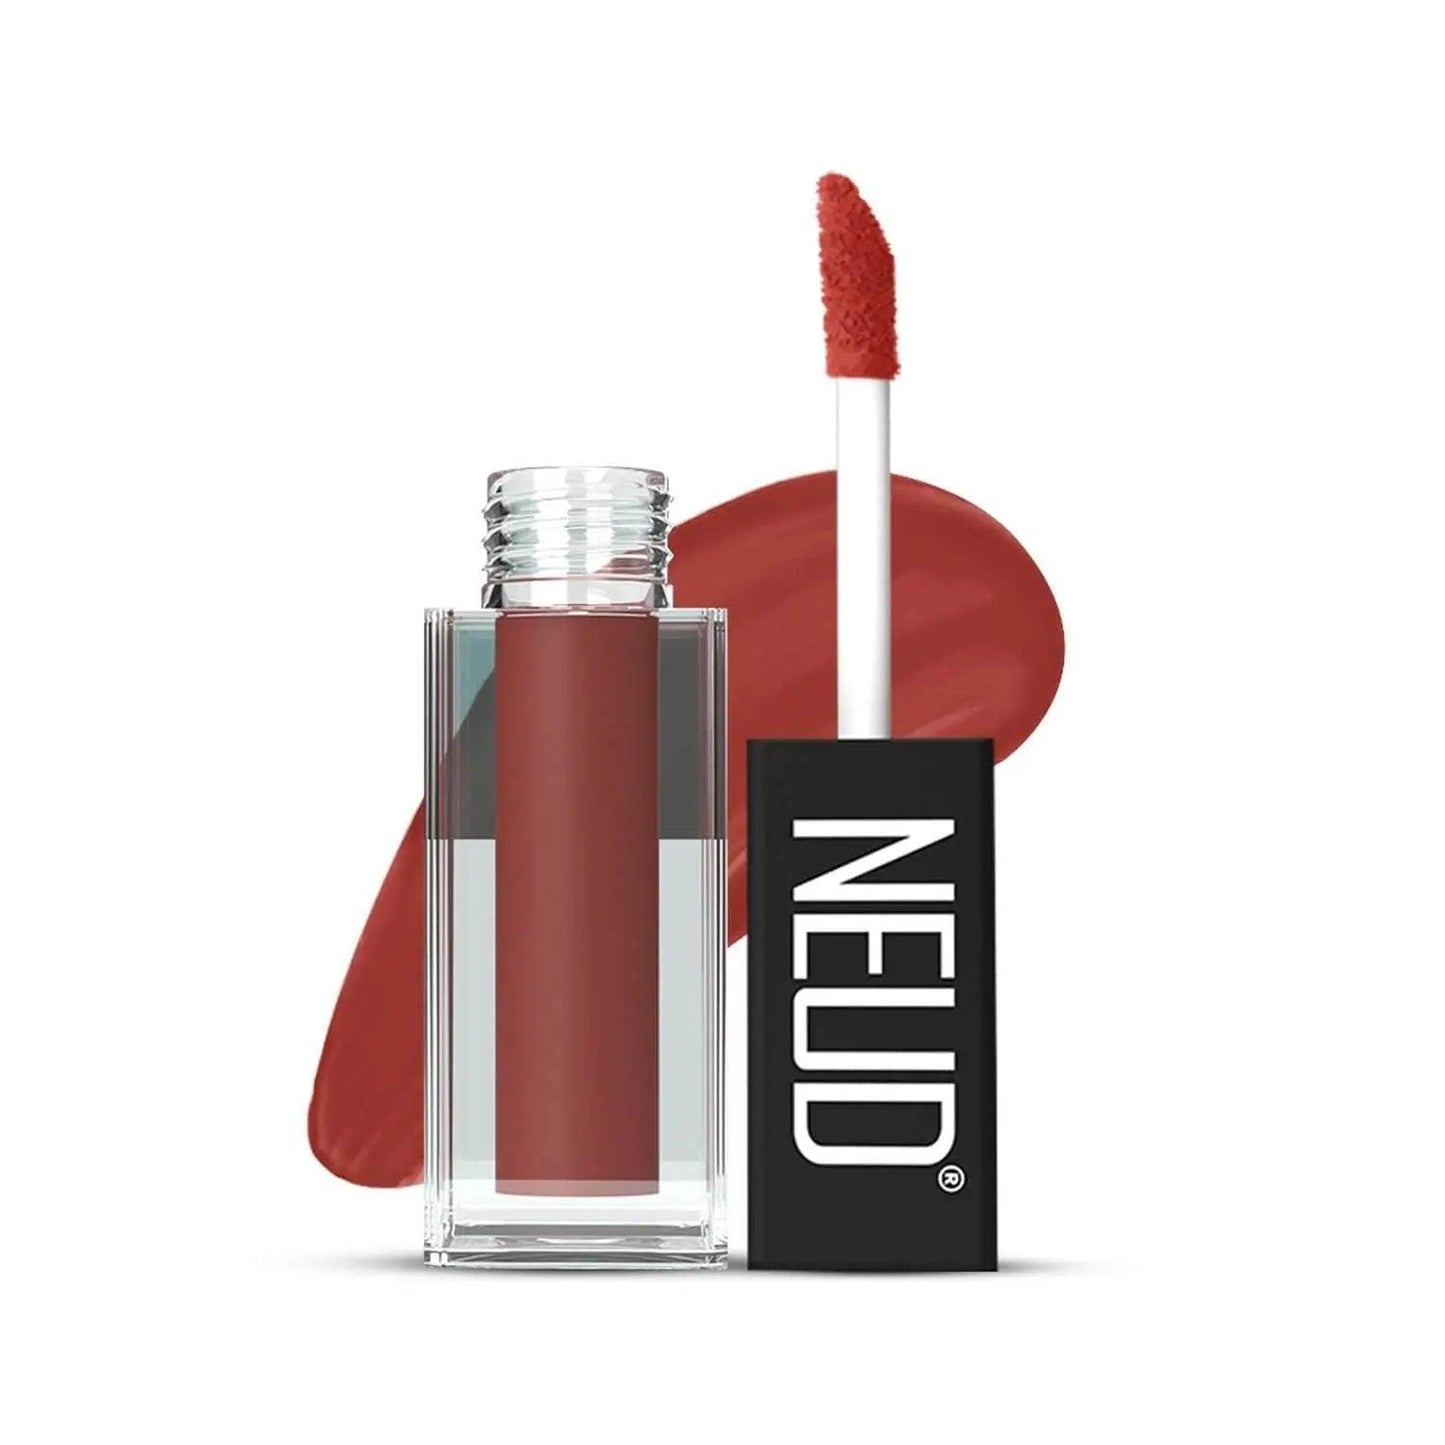 NEUD Matte Liquid Lipstick Jolly Coral with Jojoba Oil, Vitamin E and Almond Oil - Smudge Proof 12-hour Stay Formula with Free Lip Gloss 8906116281154